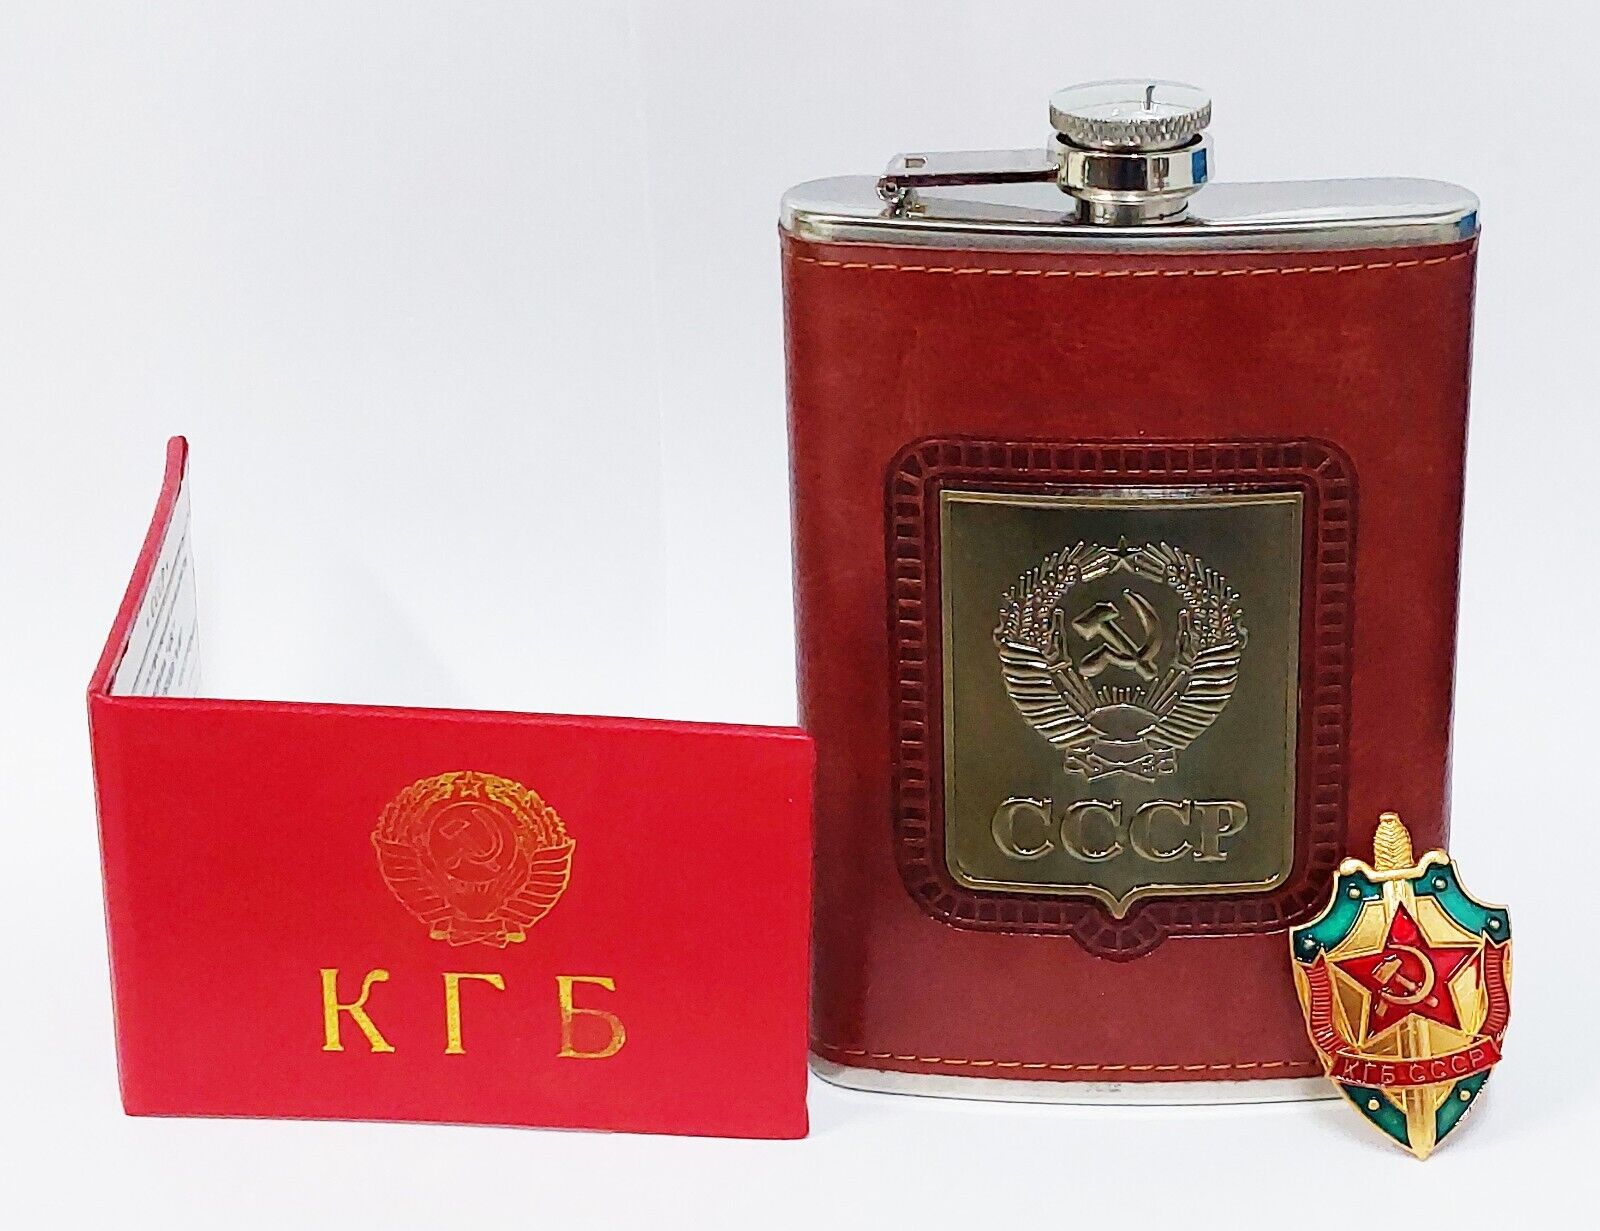 KGB USSR set of stainless steel flask, KGB ID Card and KGB metal pin badge